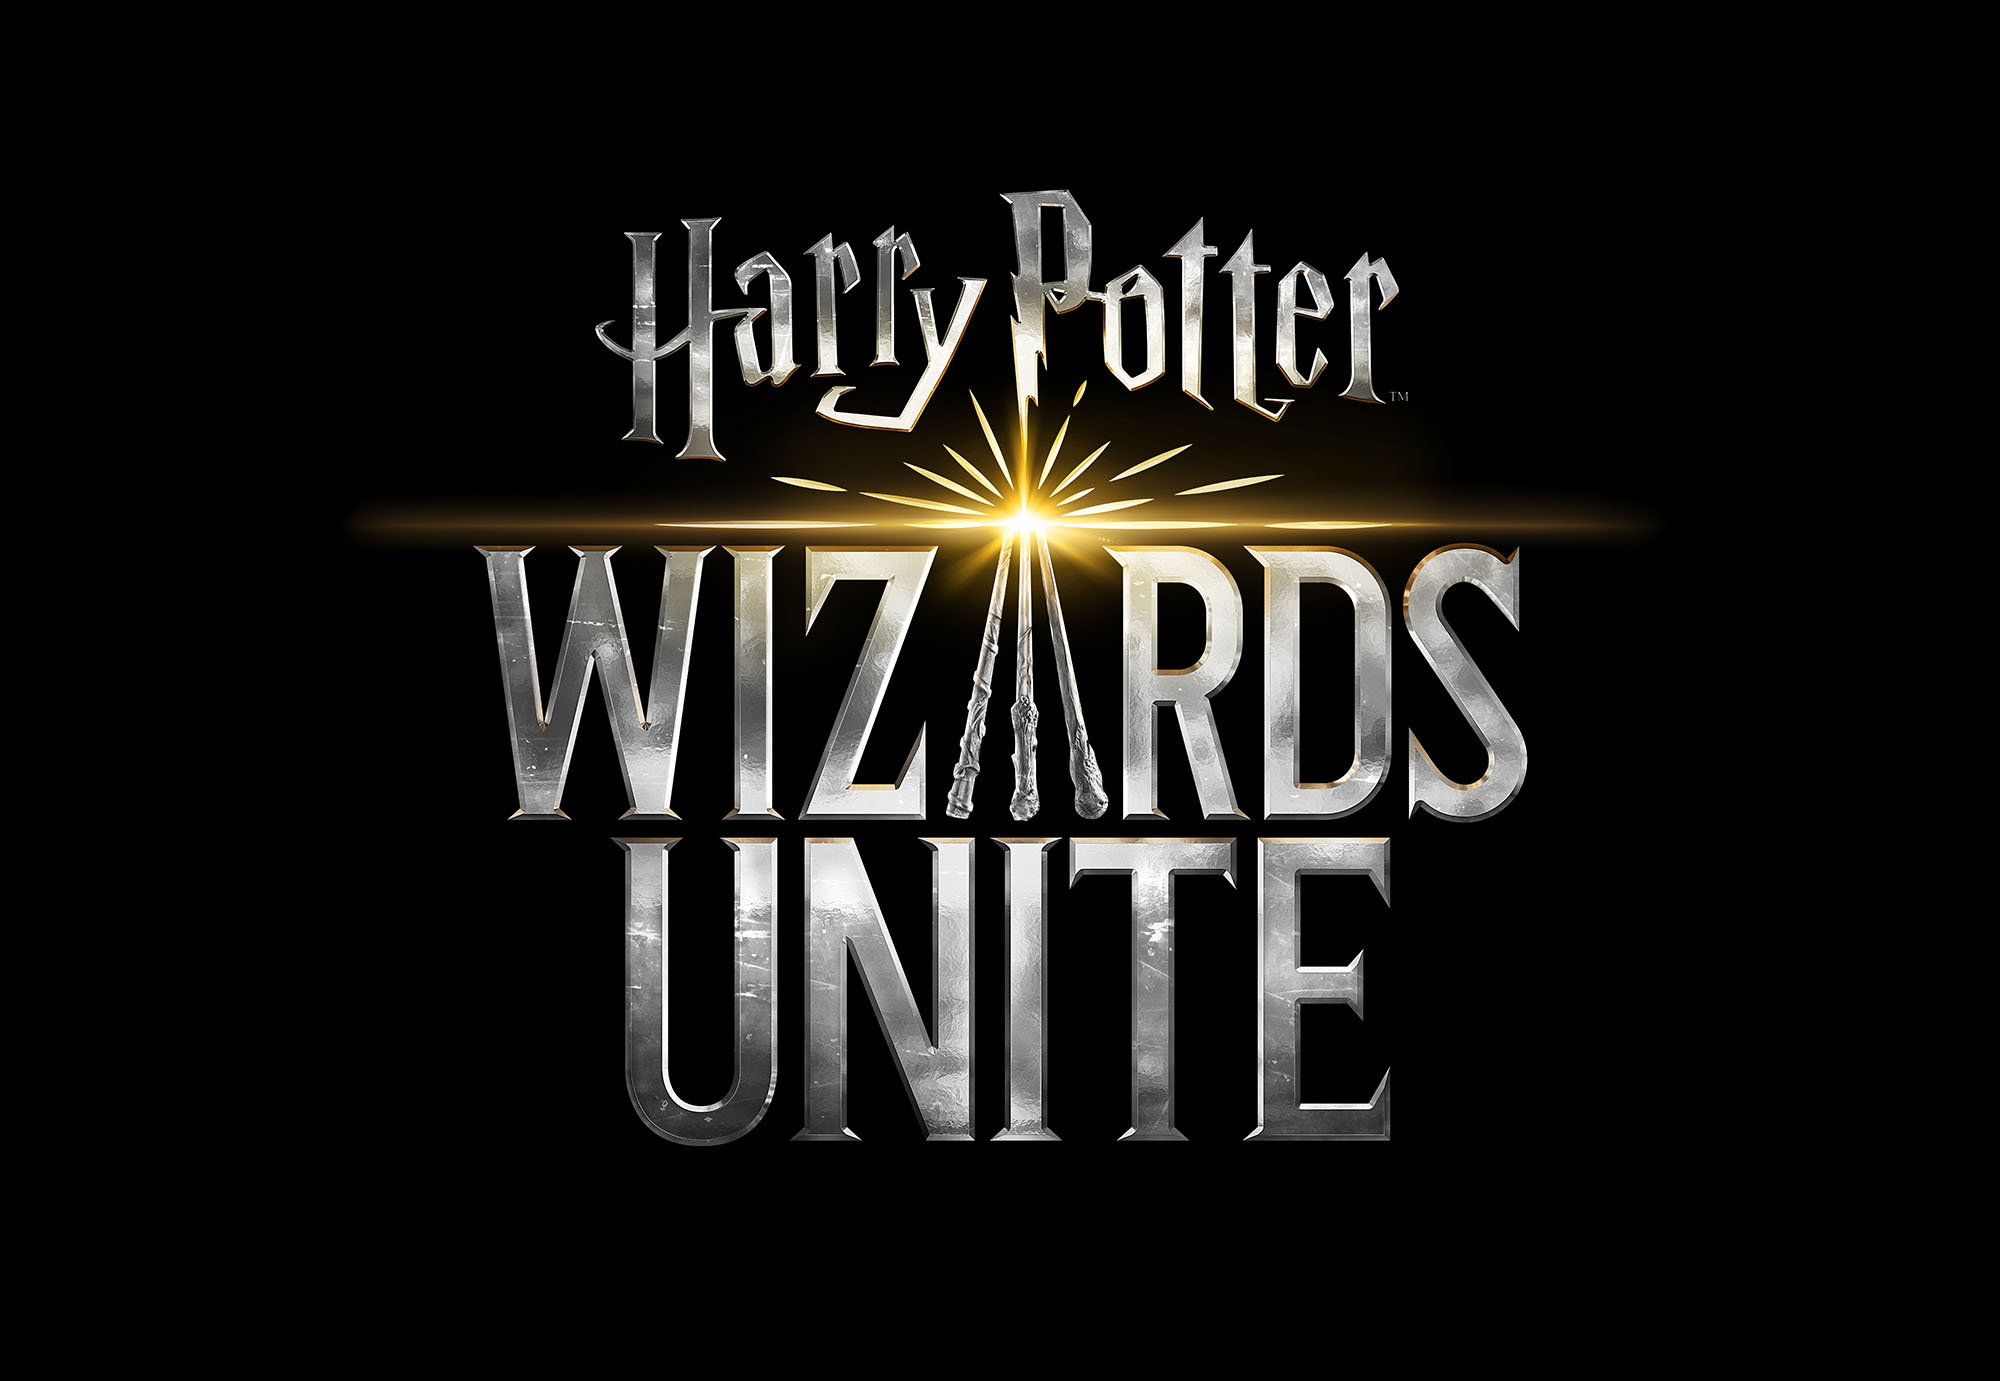 First Look At New Logo For Mobile Game Harry Potter Wizards Unite Wizarding World